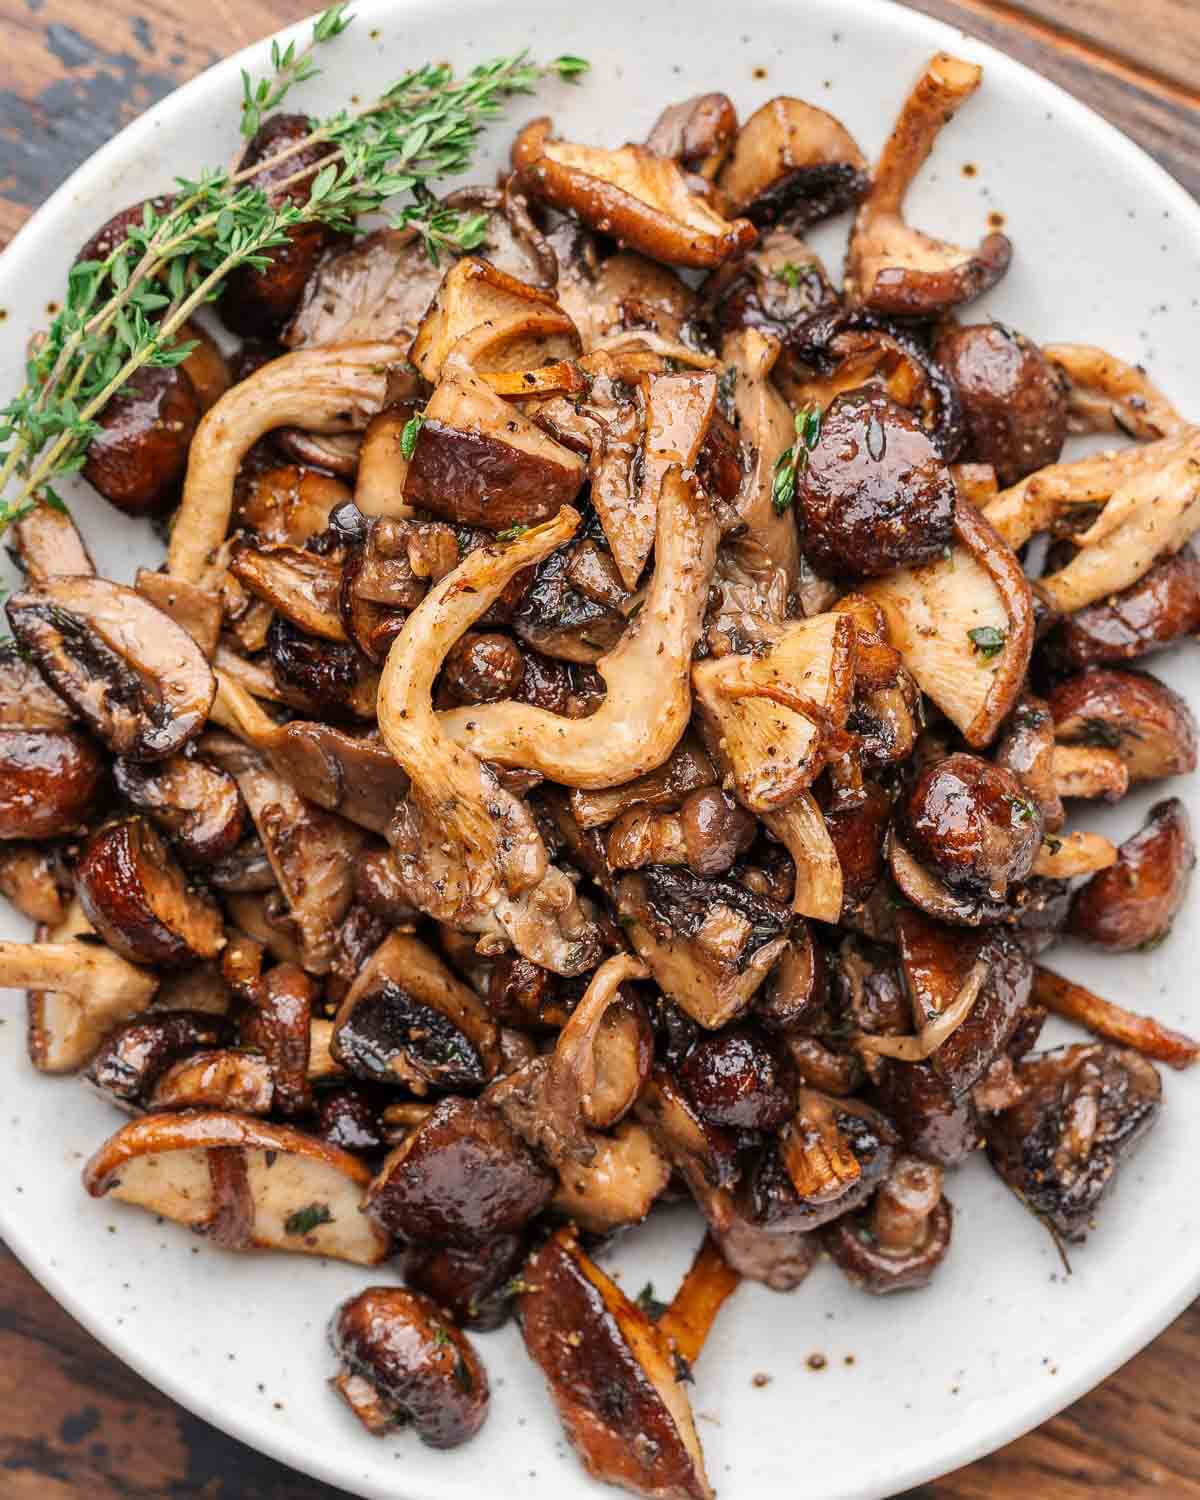 Roasted mushrooms with thyme garnish in white plate.